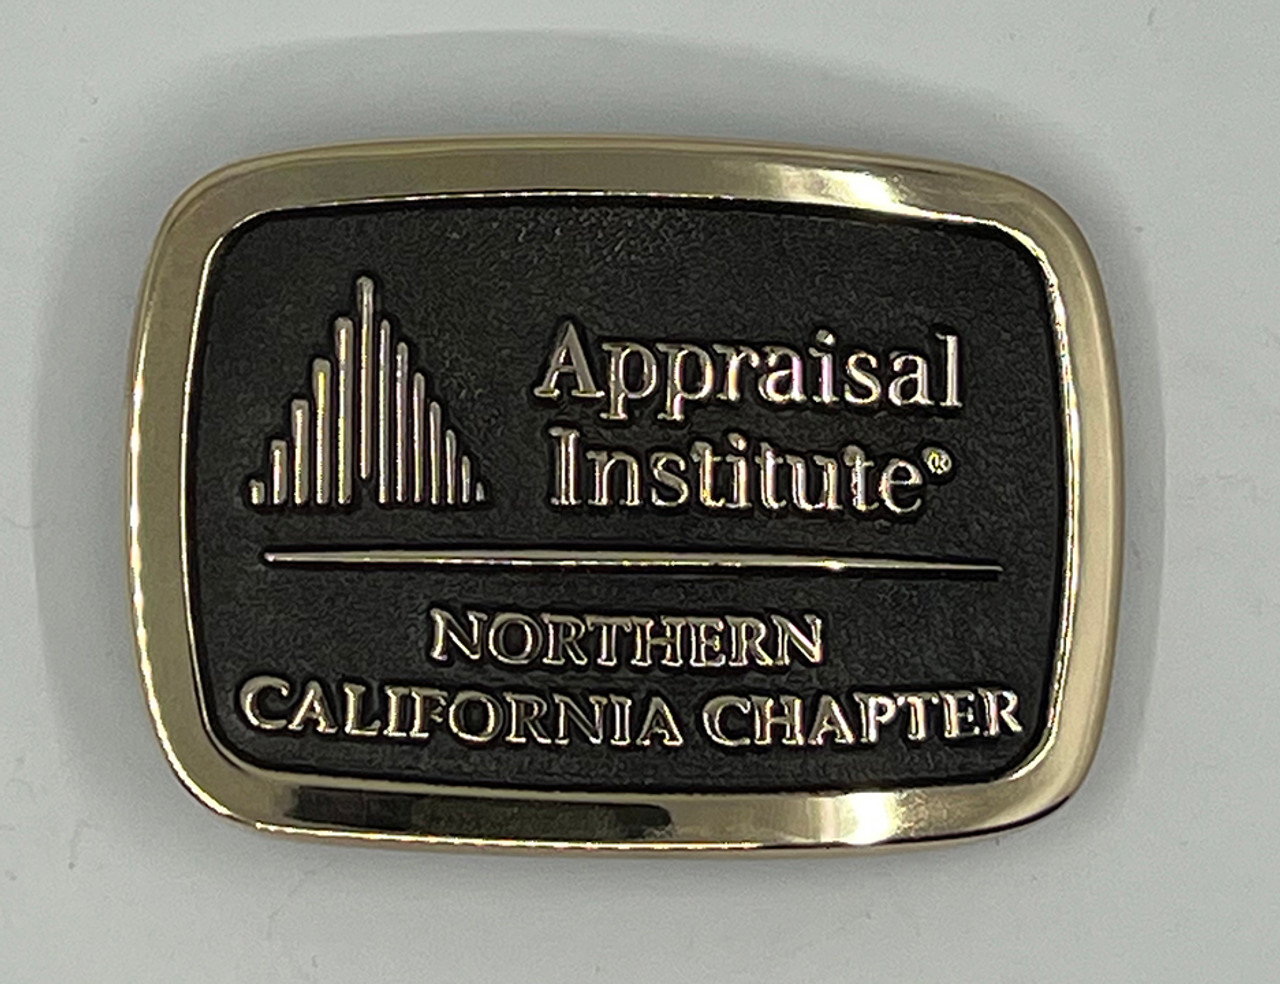 Appraisal Institute Northern California Chapter Buckle (RESTRICTED)